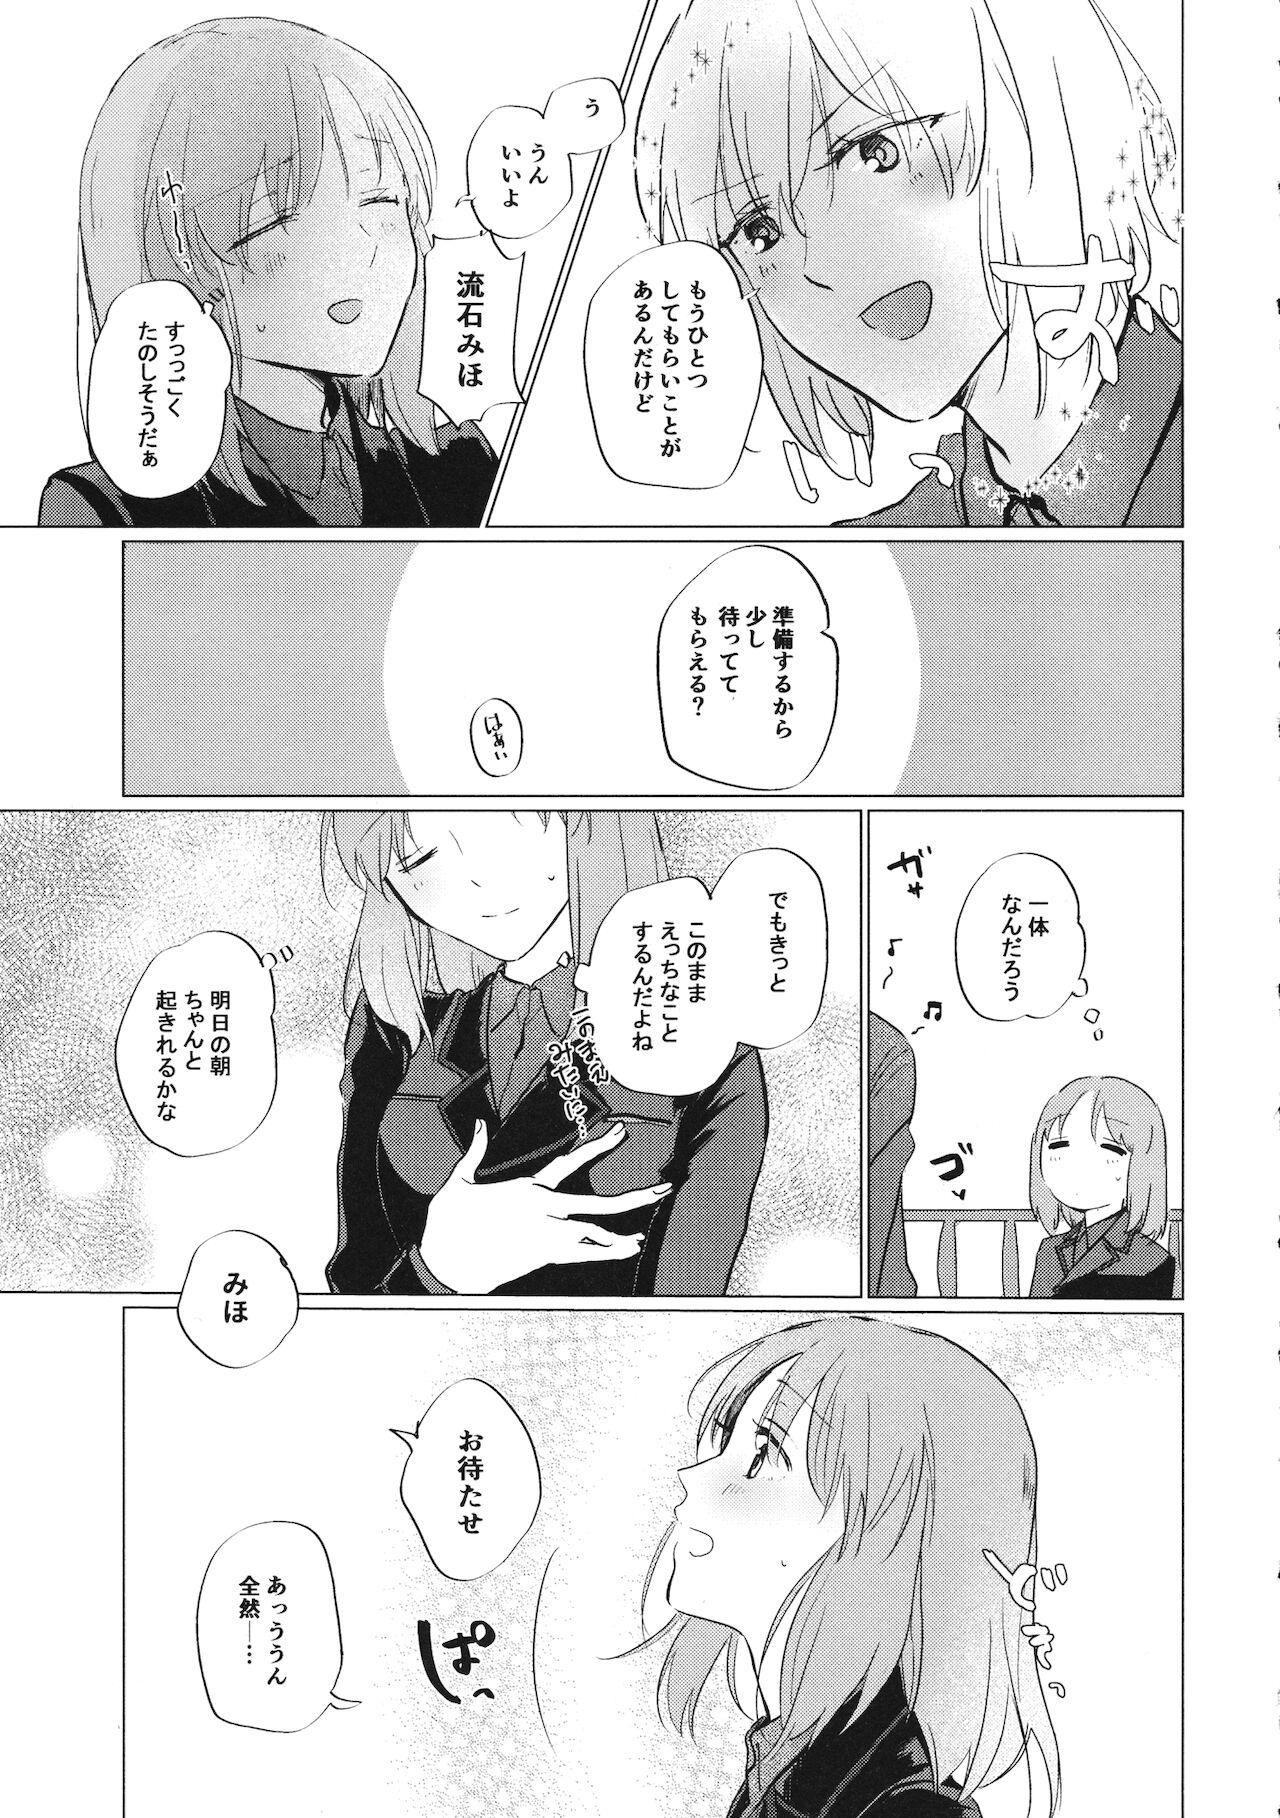 Thong 今のアナタと - Girls und panzer Family Roleplay - Page 8